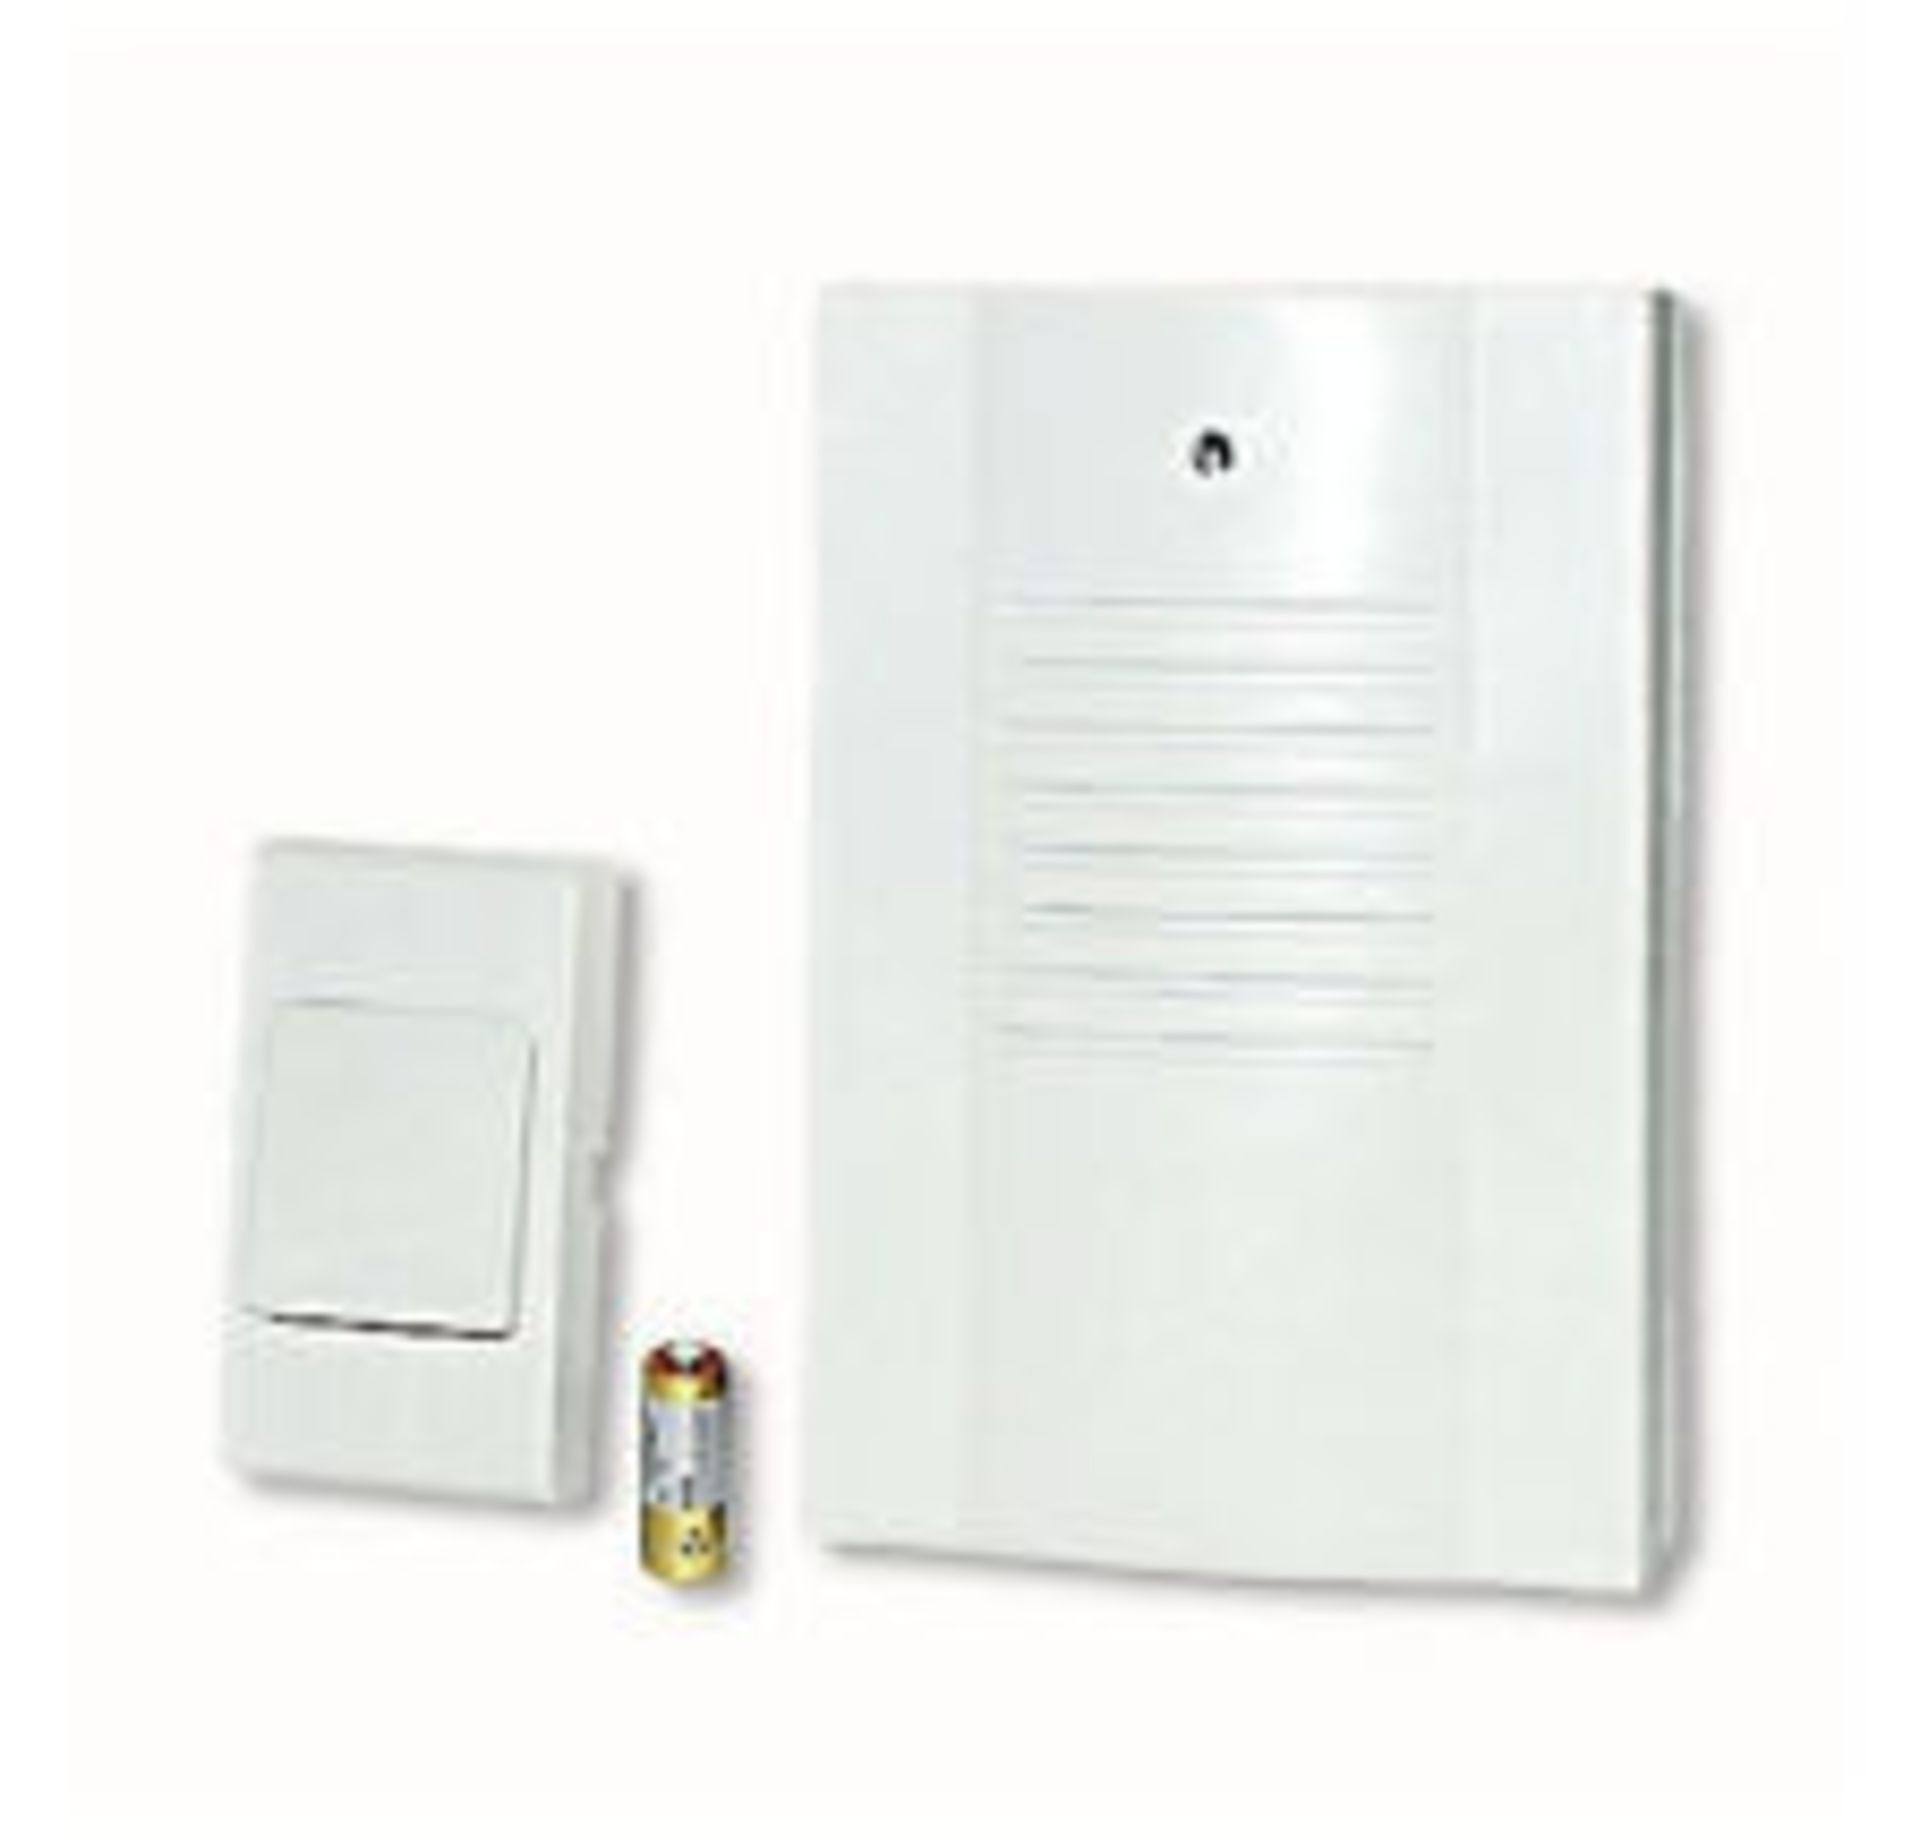 V Brand New Wireless Doorbell With 16 Different Melodies And Up To 30 Metre Range X 2 Bid price to